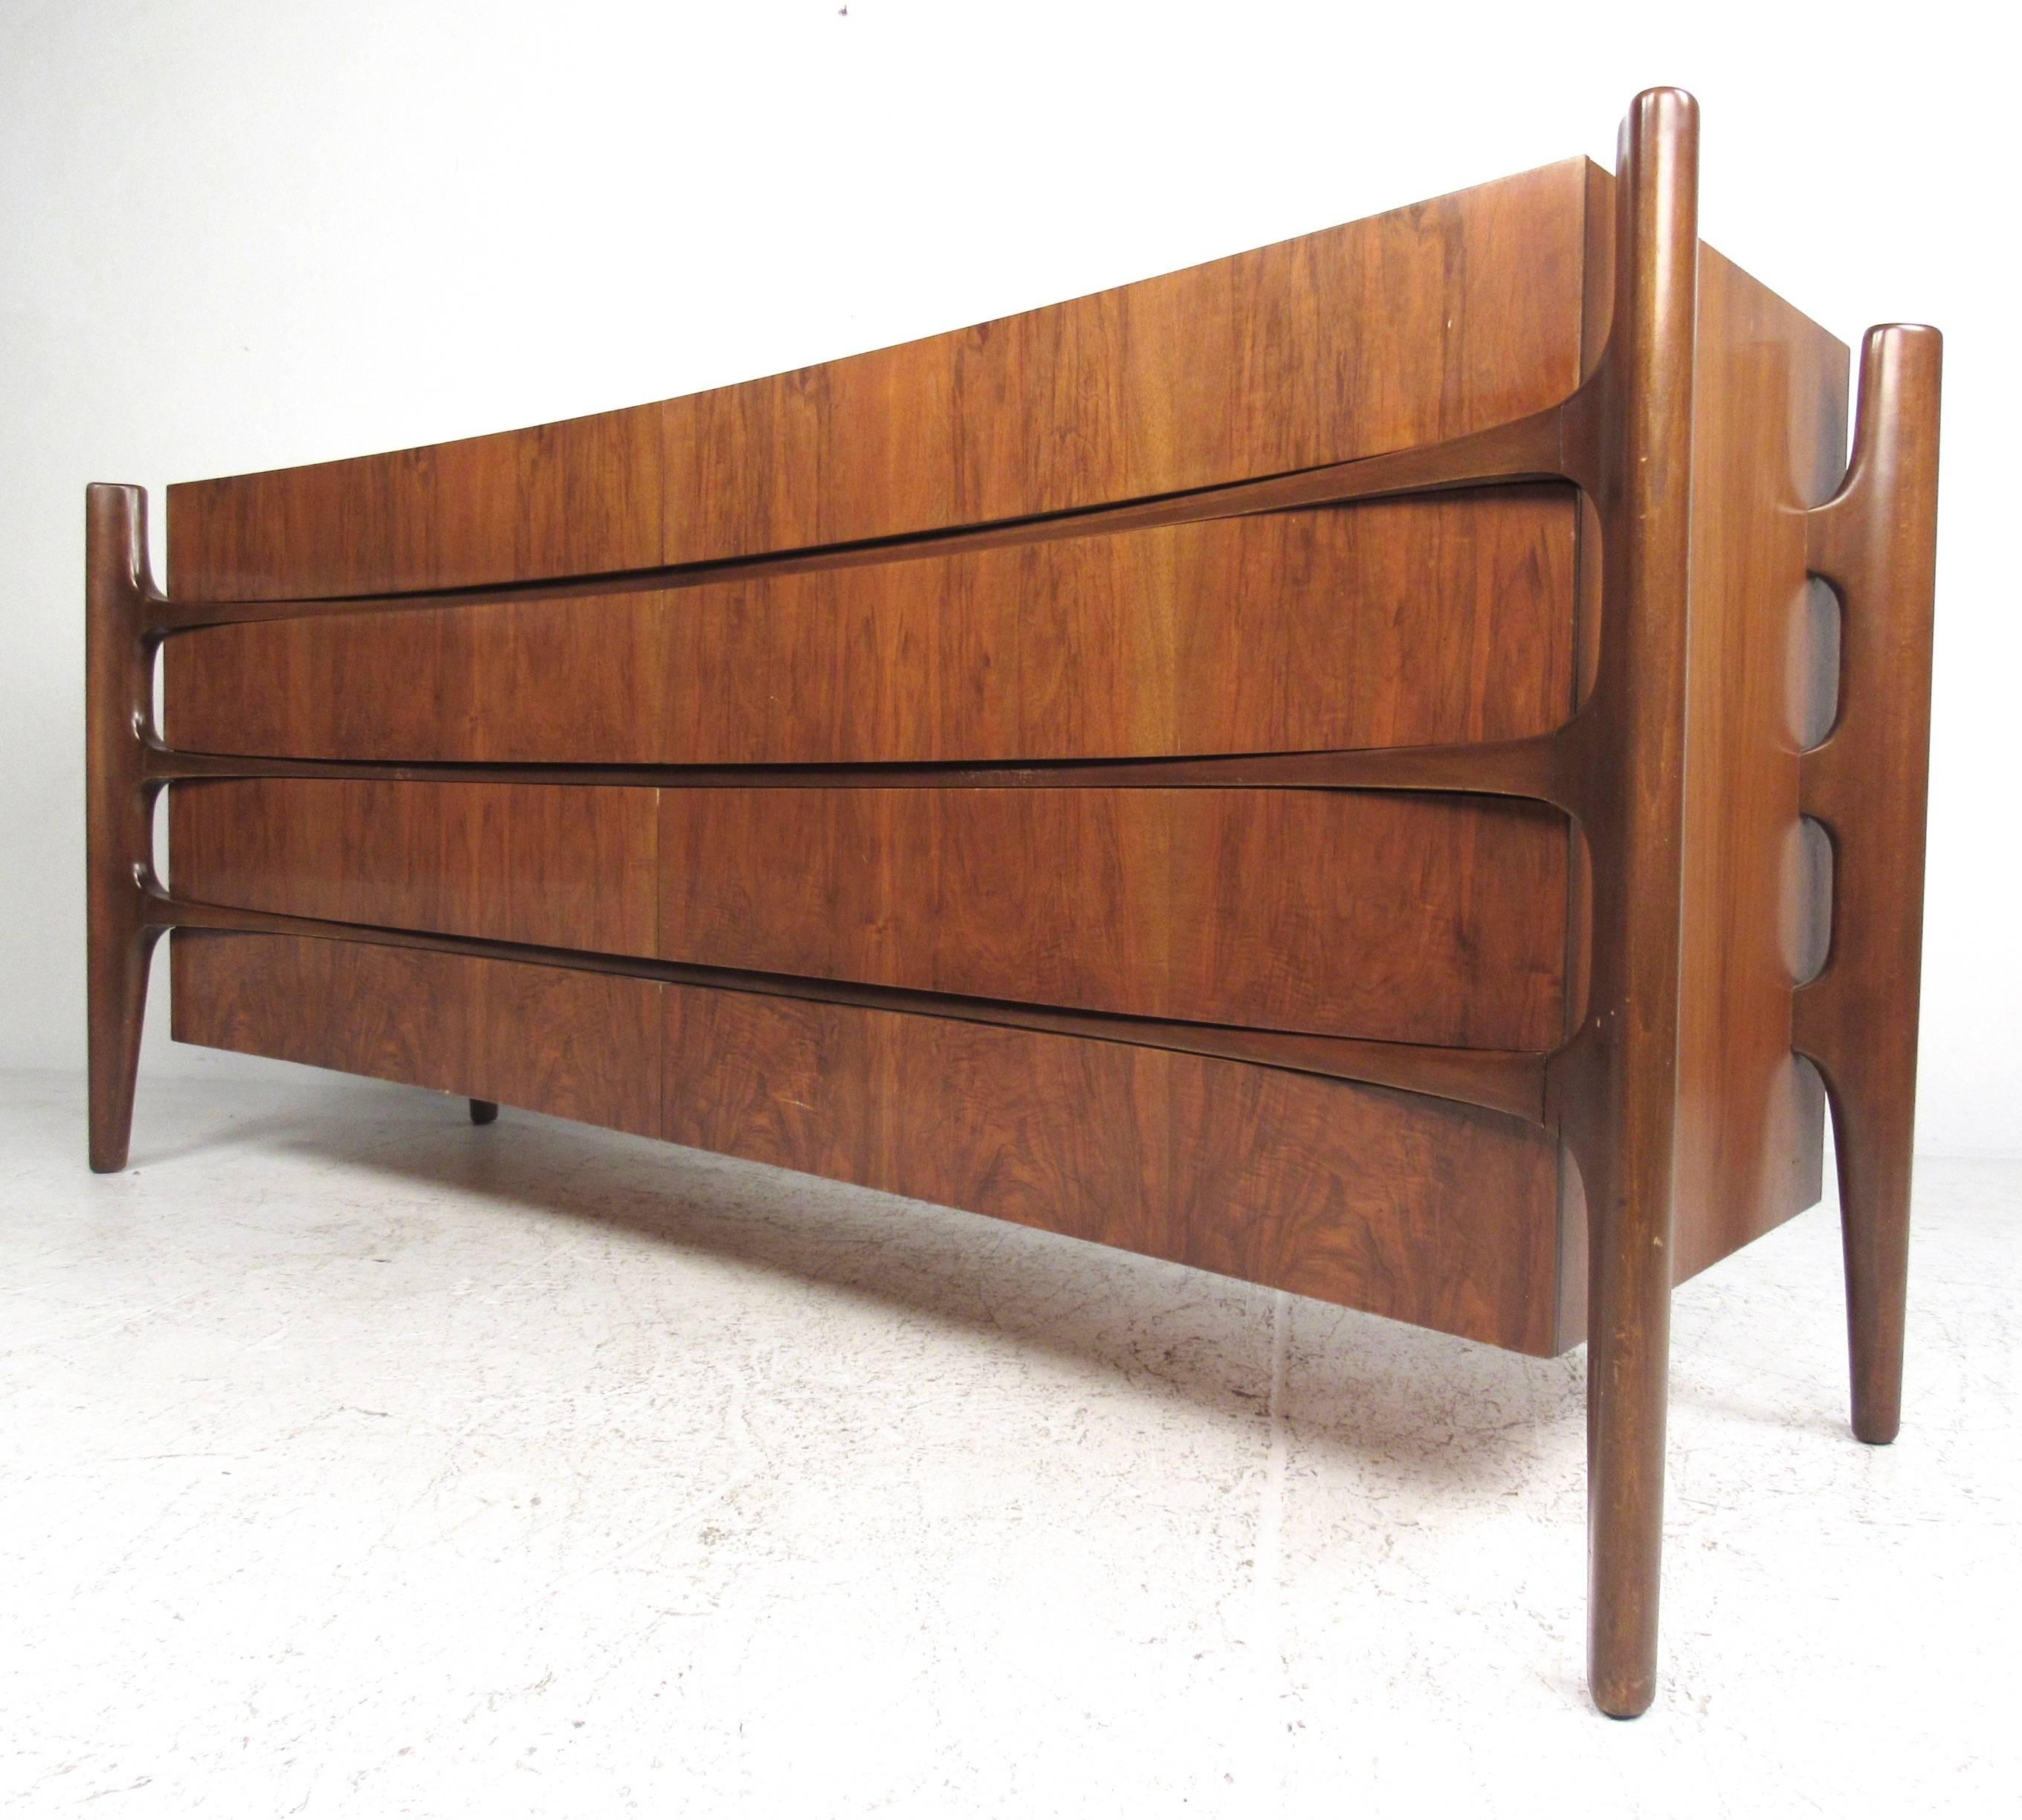 This four-piece Mid-Century bedroom set by William Hinn features an iconic concave sculpted design in a stunning vintage walnut finish. Unique two-piece highboy dresser, low eight-drawer dresser and nightstands are all from a matching set, having